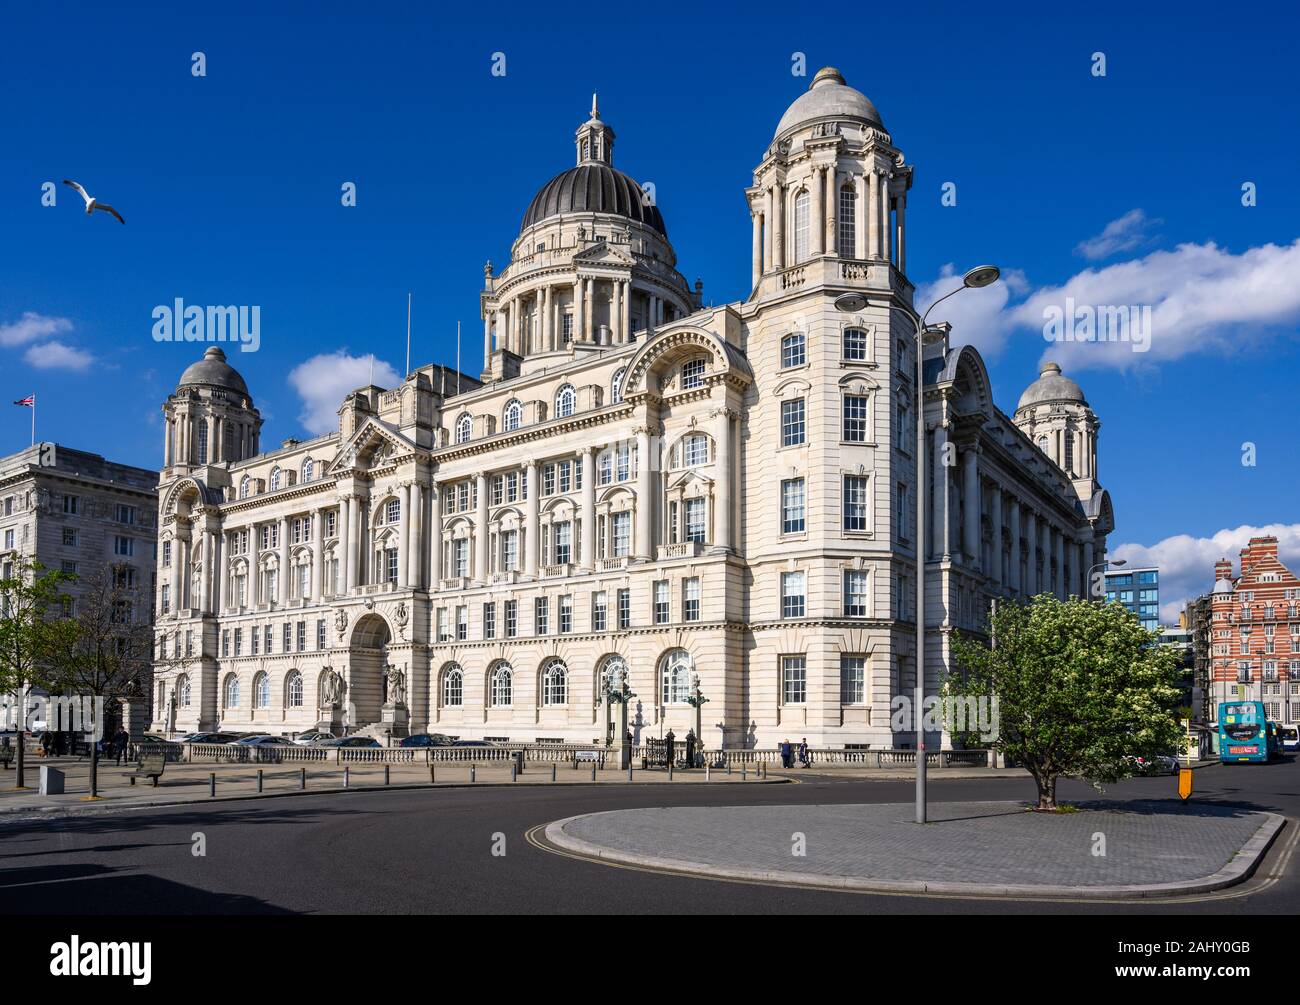 The Port of Liverpool Building (1907) is one of the Three Graces on Pier Head, Liverpool, England, UK. Stock Photo